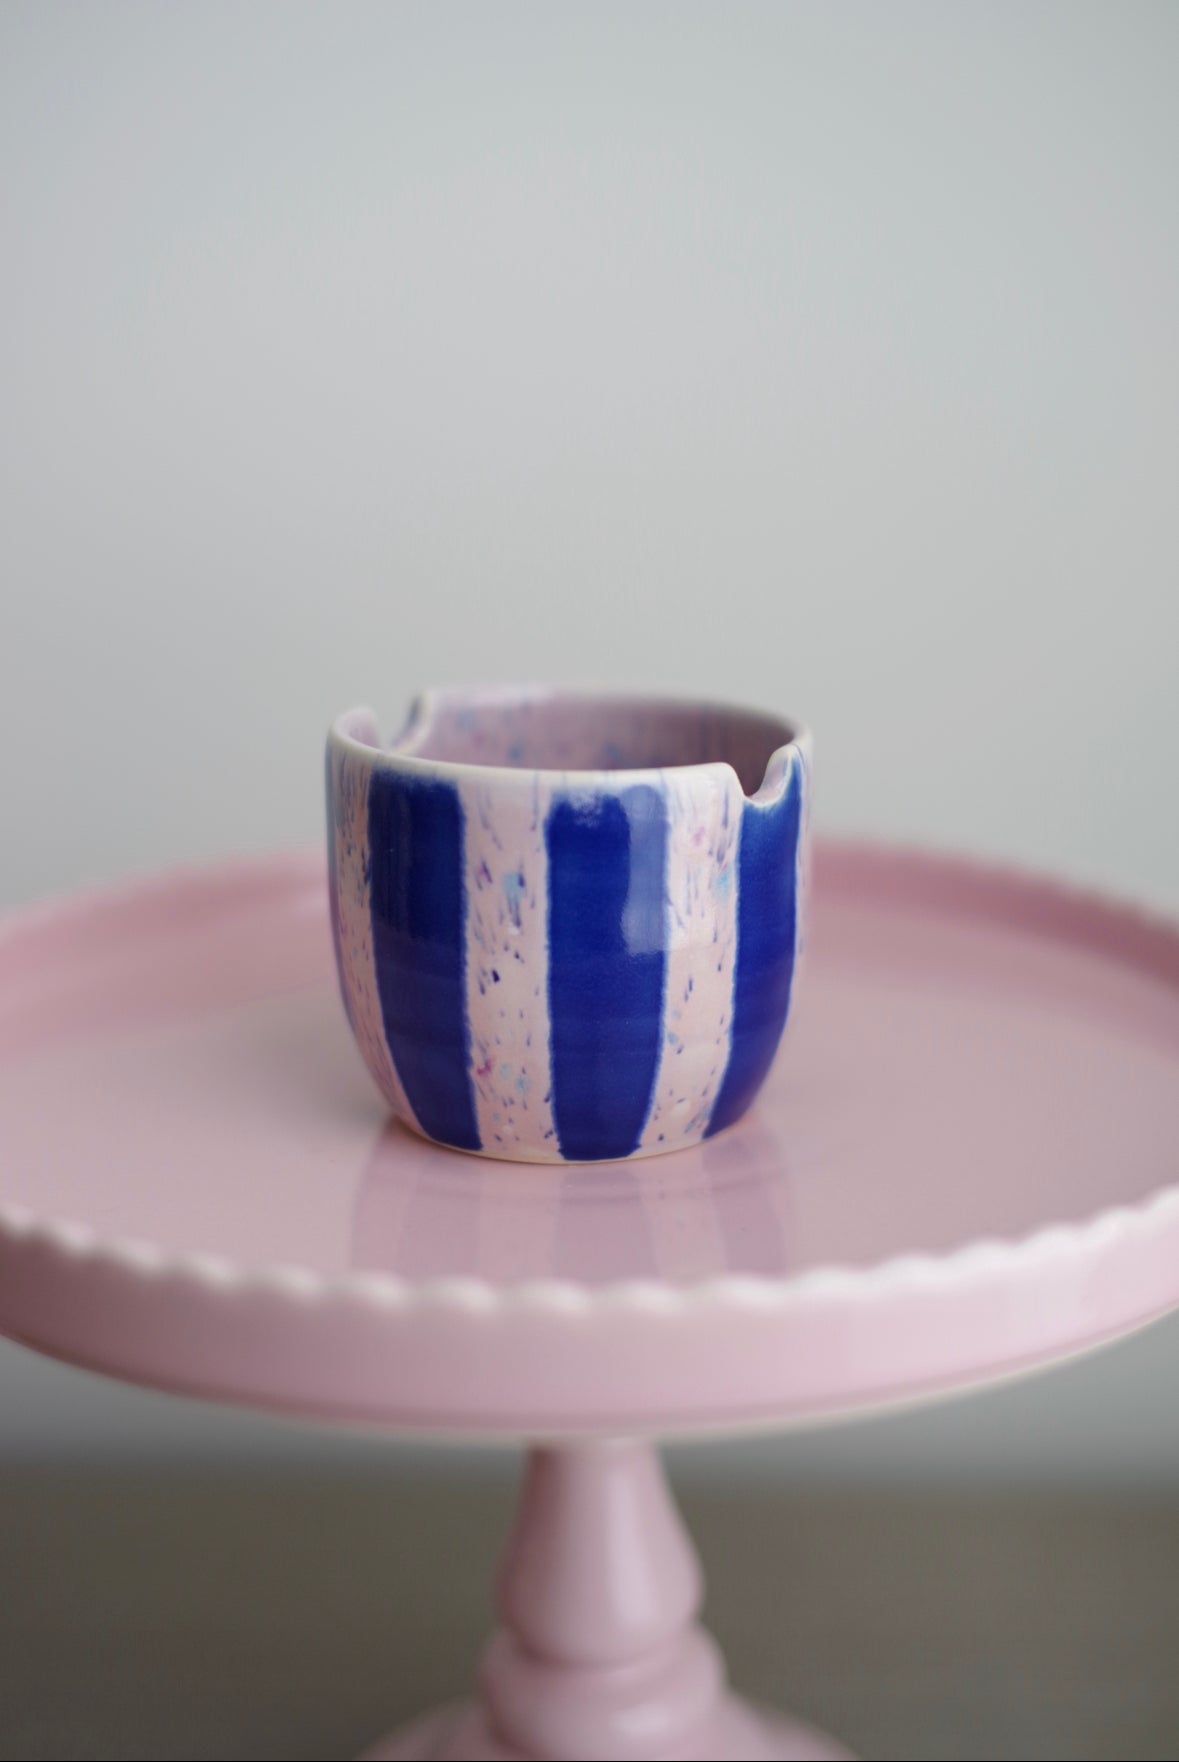 Painter’s cup striped blue/lilac